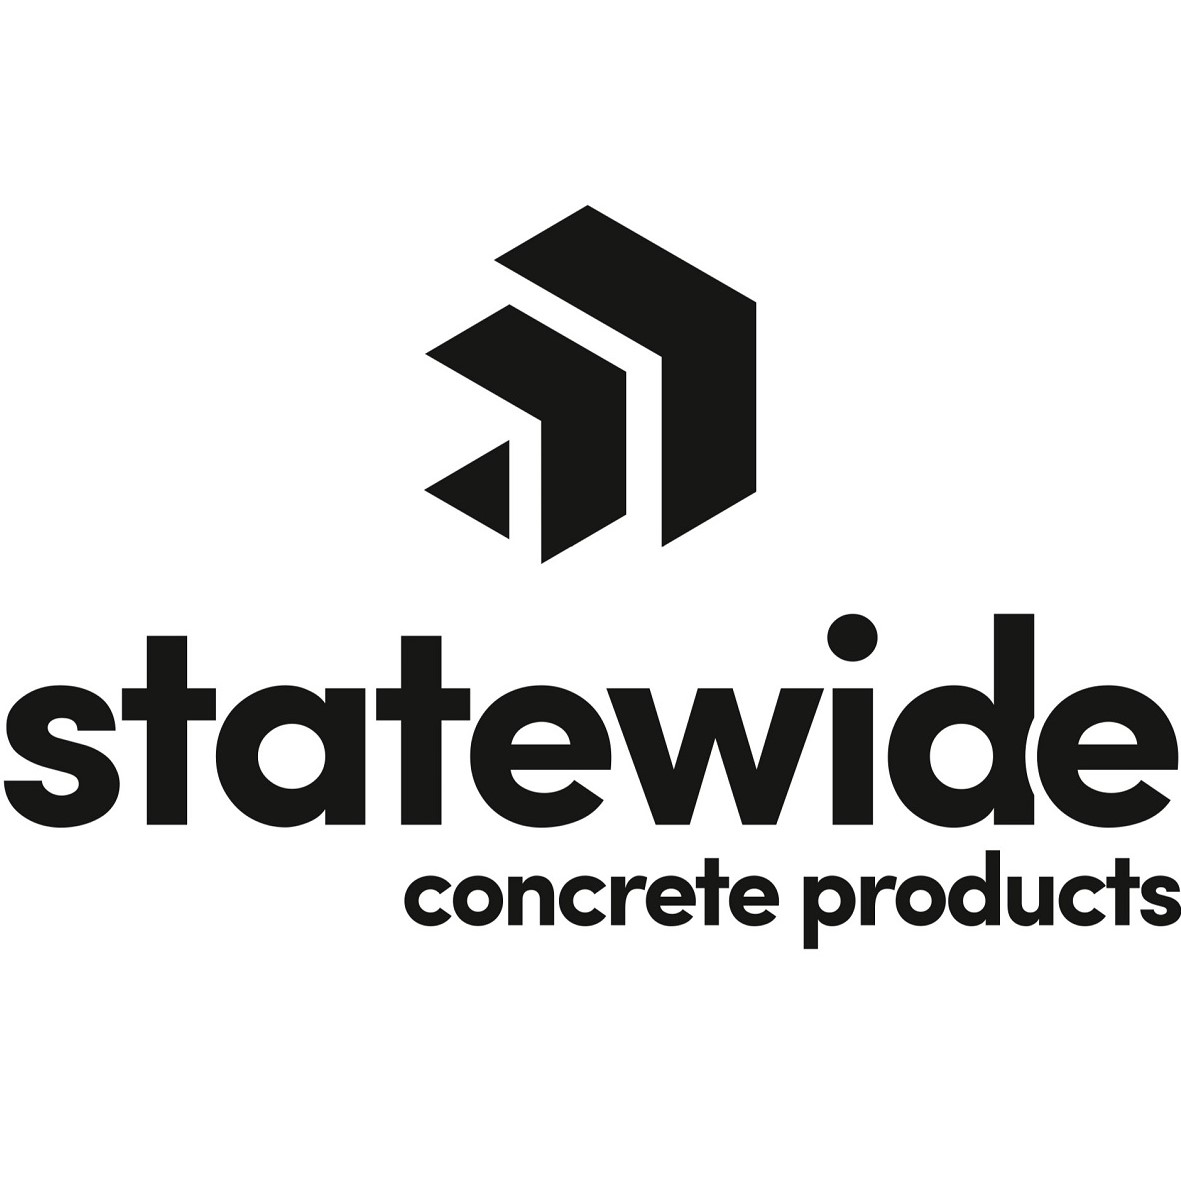 Statewide Concrete Products Contemporary